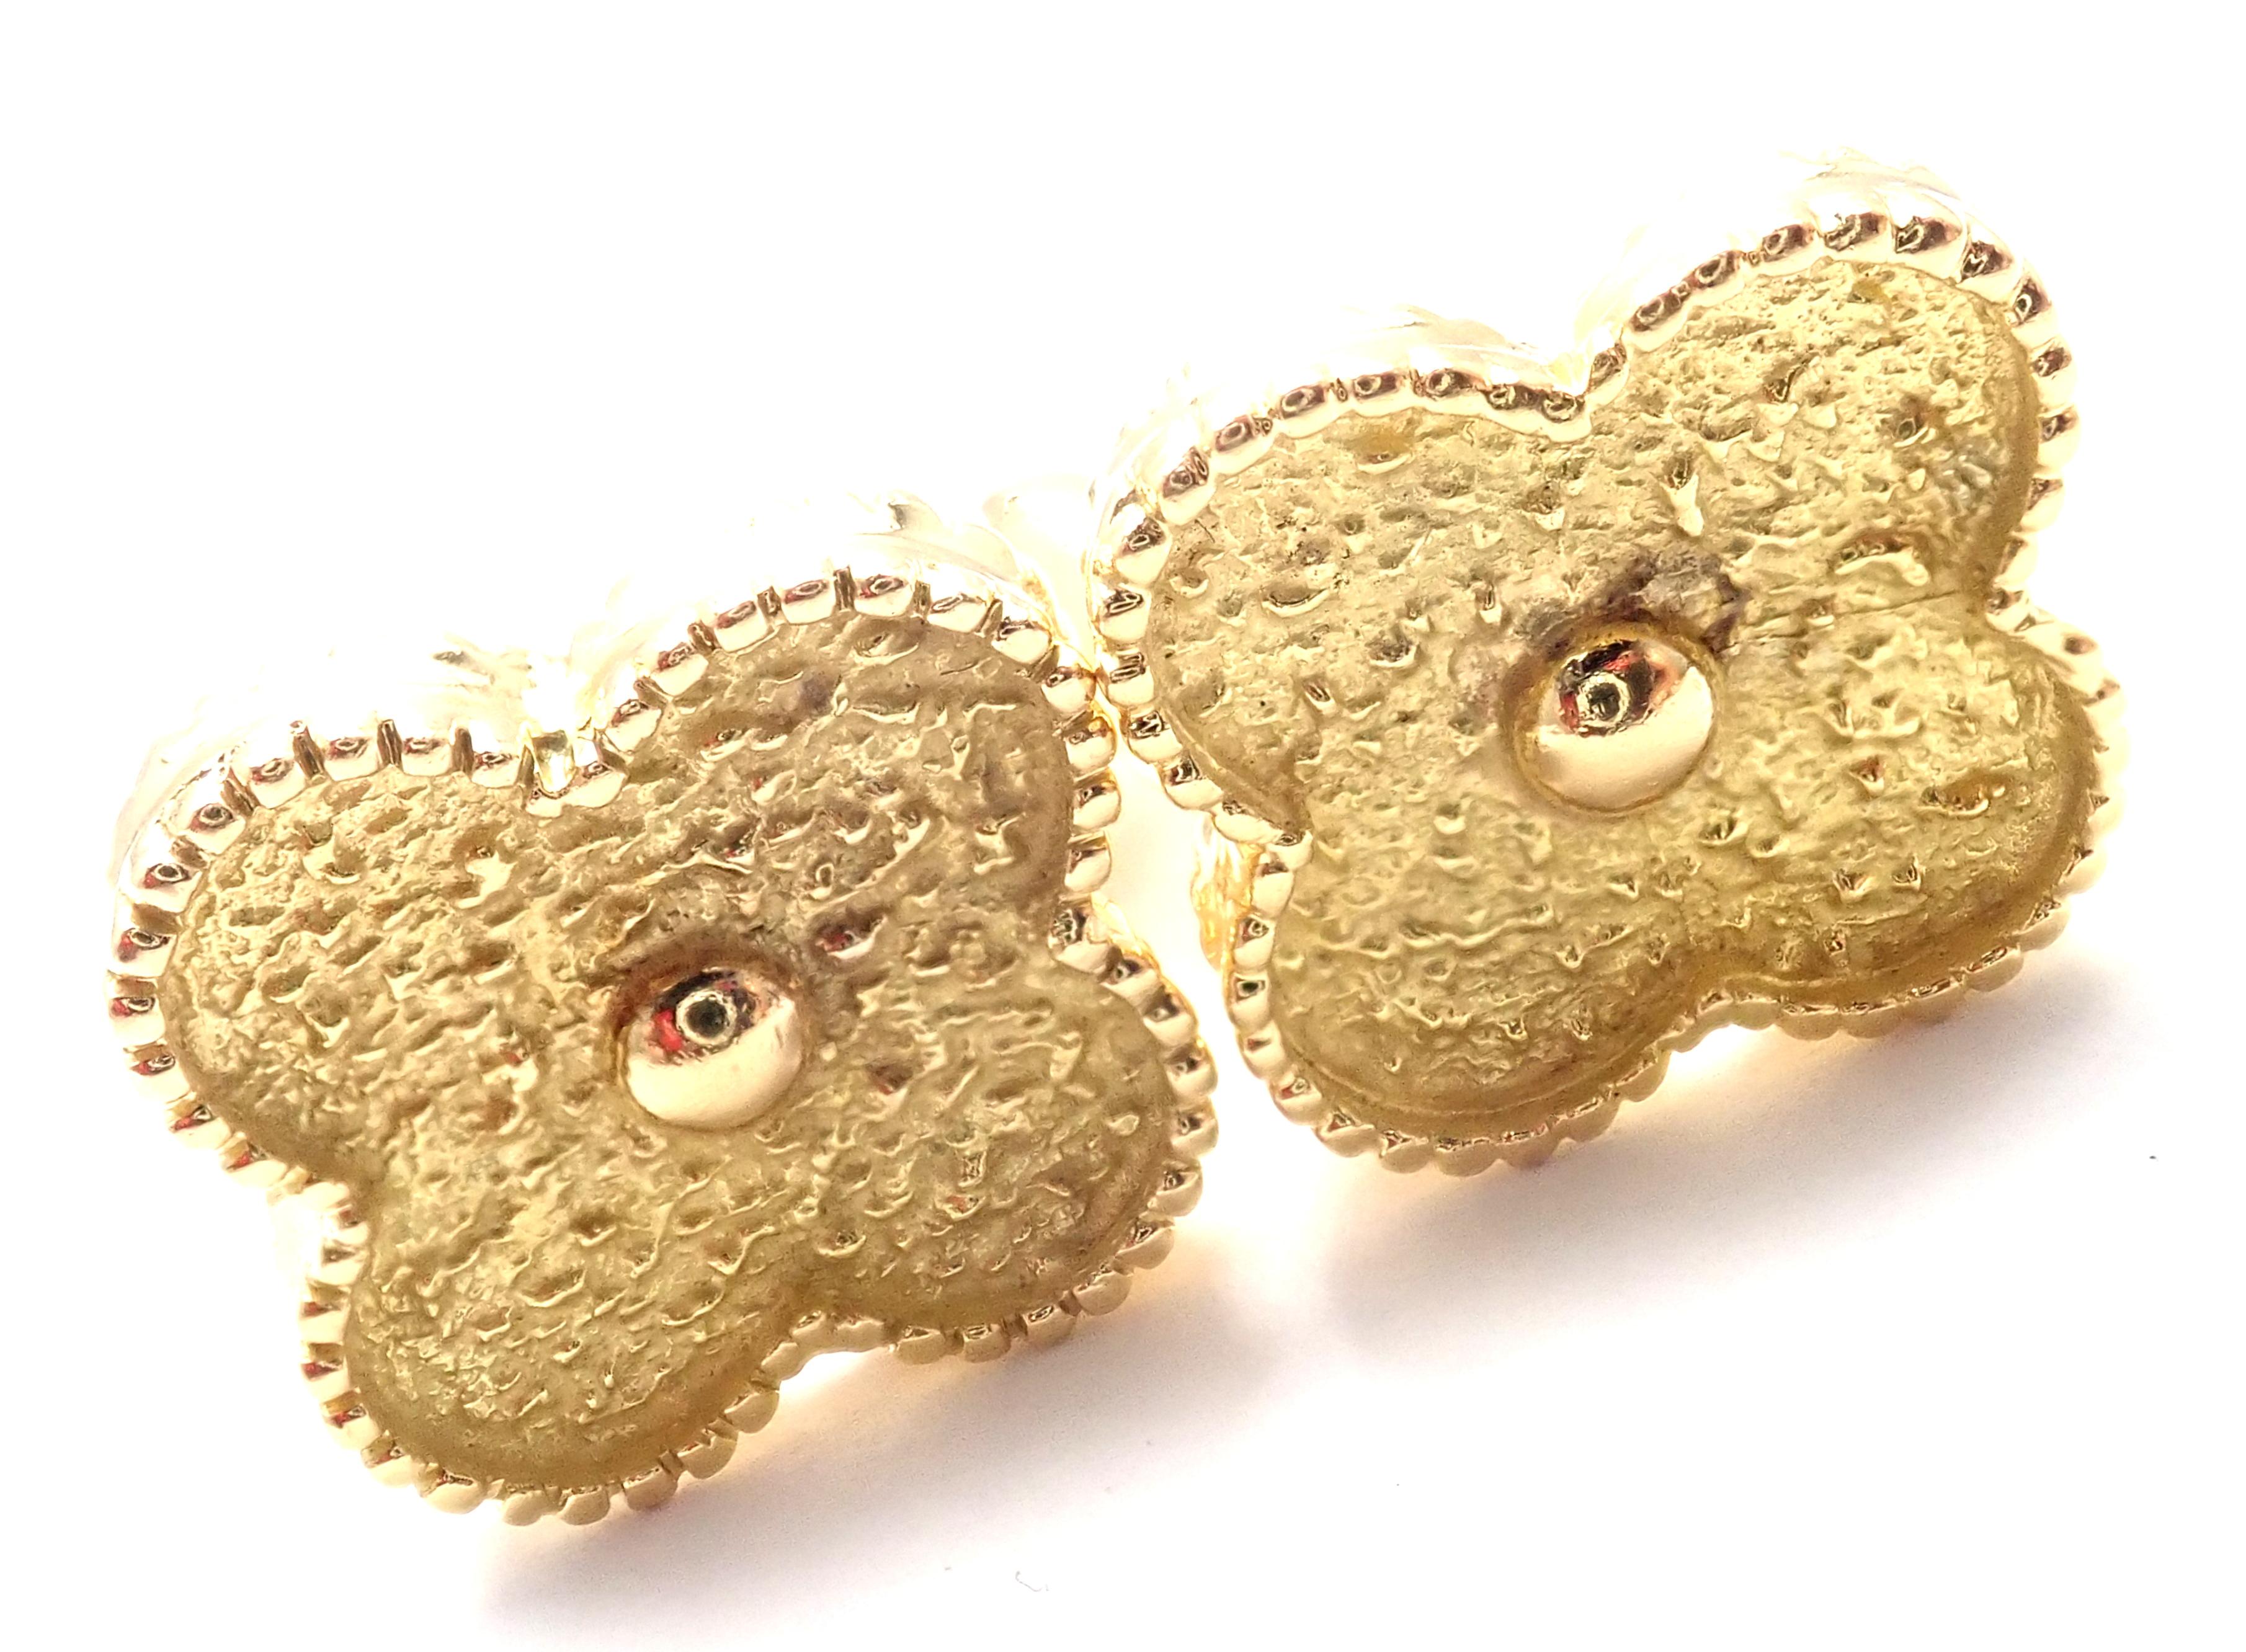 18k Yellow Gold Large Vintage Earrings by Van Cleef & Arpels.  
These earrings are made for non pierced ears, but they can be converted by adding posts.
Details:  
Measurements: 19.5mm
Weight: 15 grams
Stamped Hallmarks: VCA NY 18k 3KXXXXXX
*Free